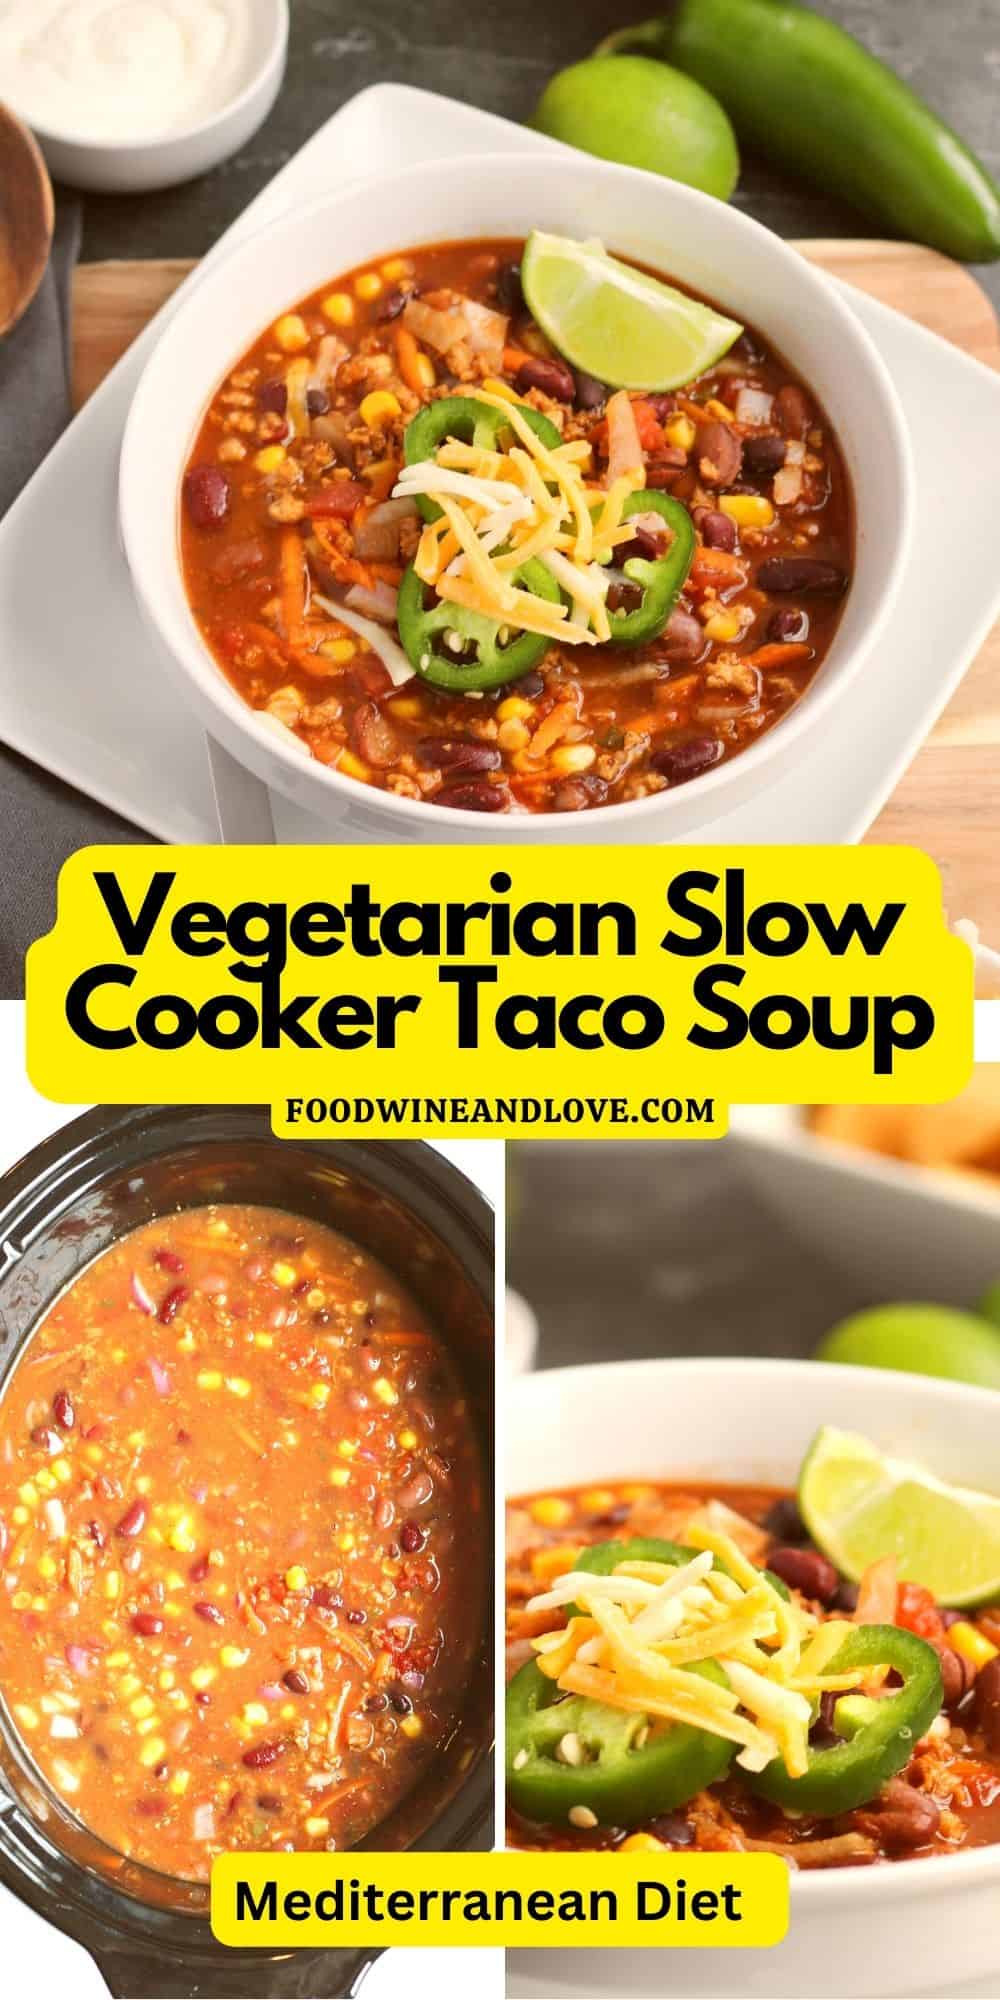 Vegetarian Slow Cooker Taco Soup is a delicious hearty and flavorful soup made with healthy and plant-based ingredients.